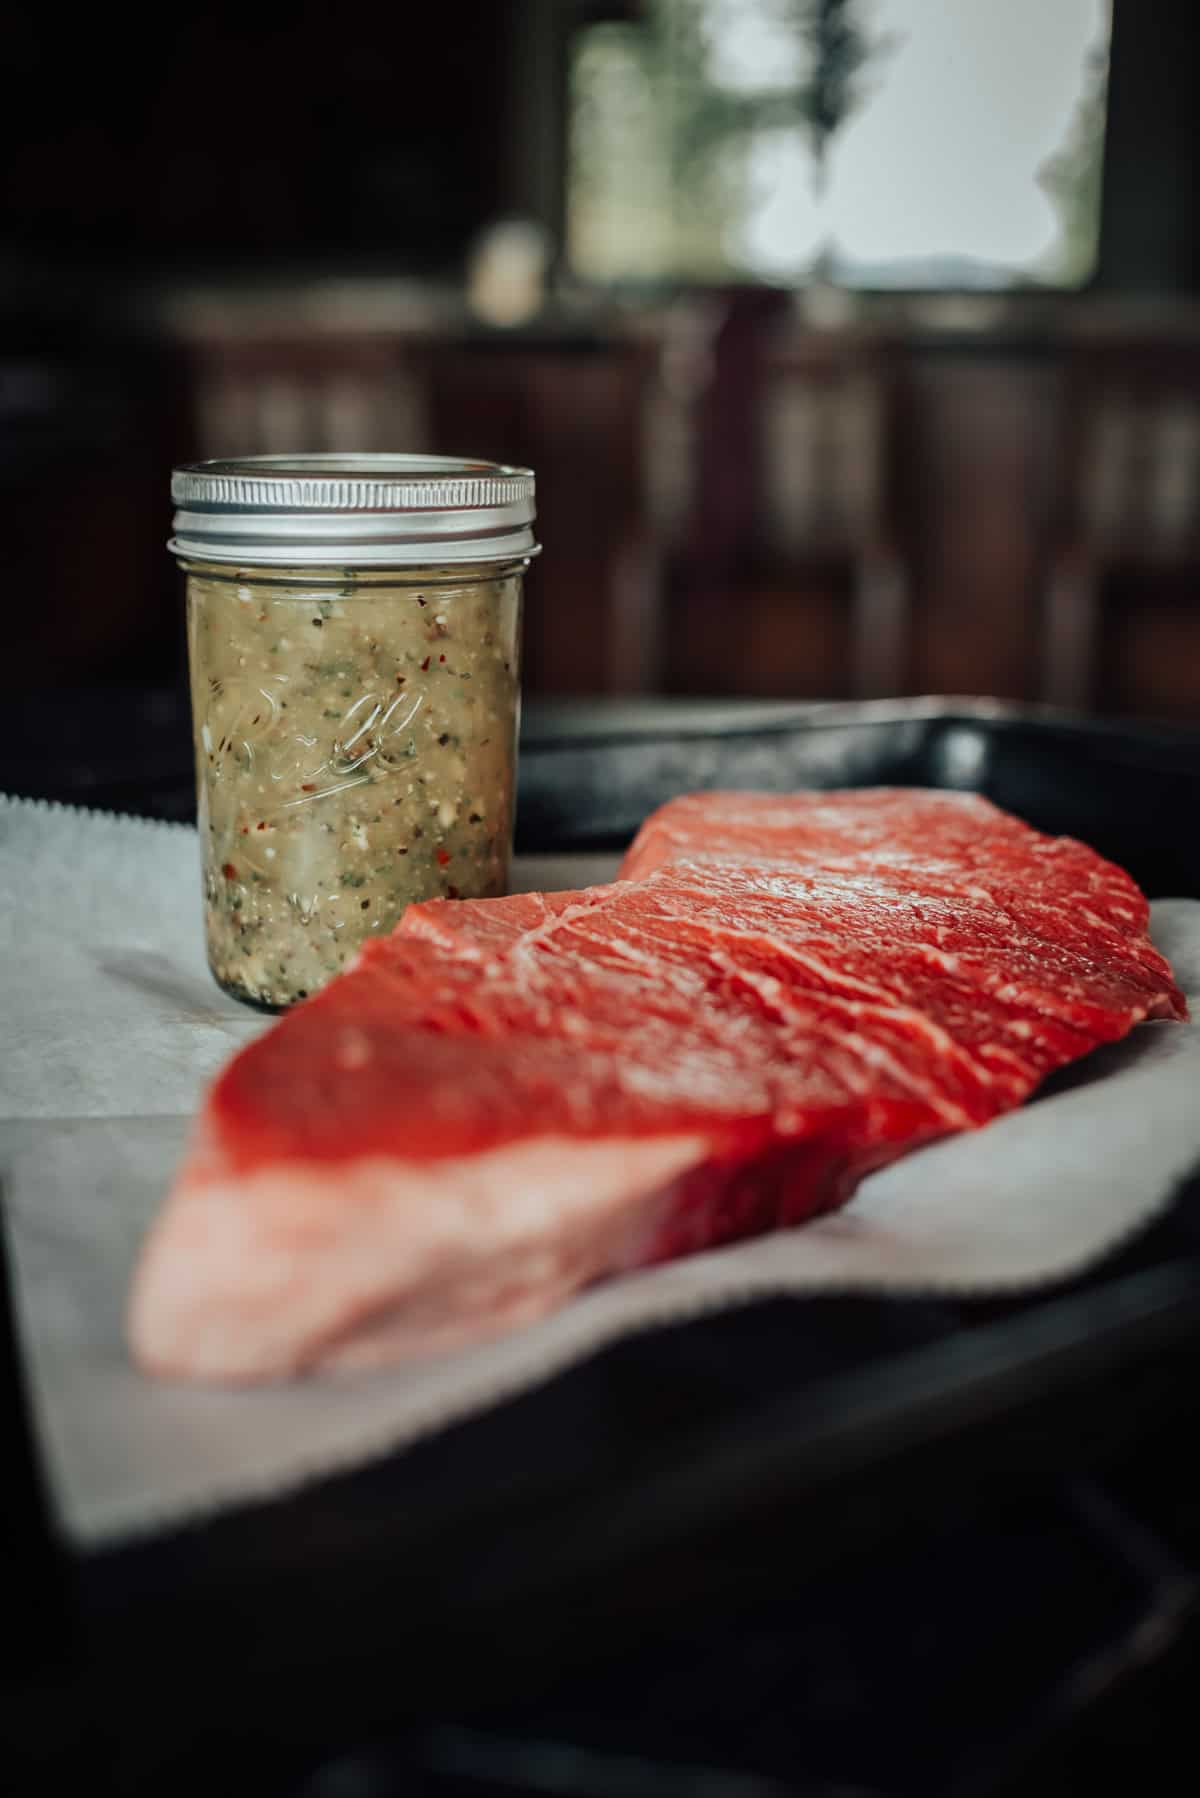 A raw steak sits on parchment paper with a jar of marinade beside it, both placed on a dark tray in a kitchen.